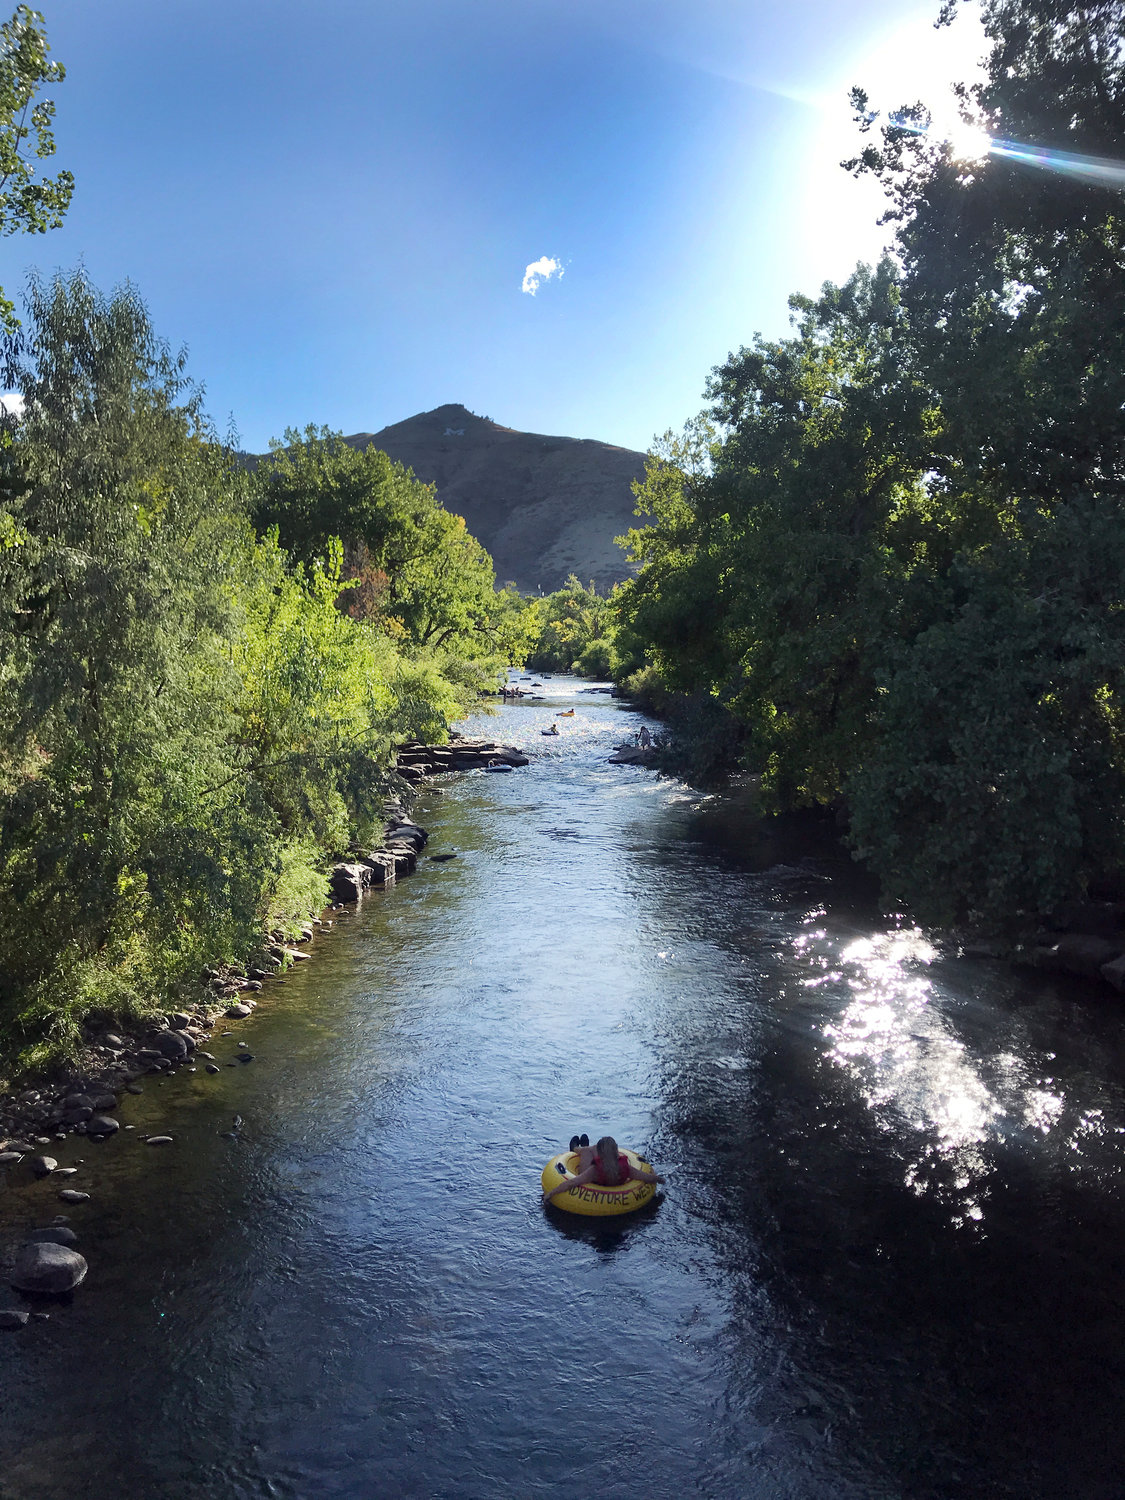 Clear Creek is a popular spot for tubing in the summer.